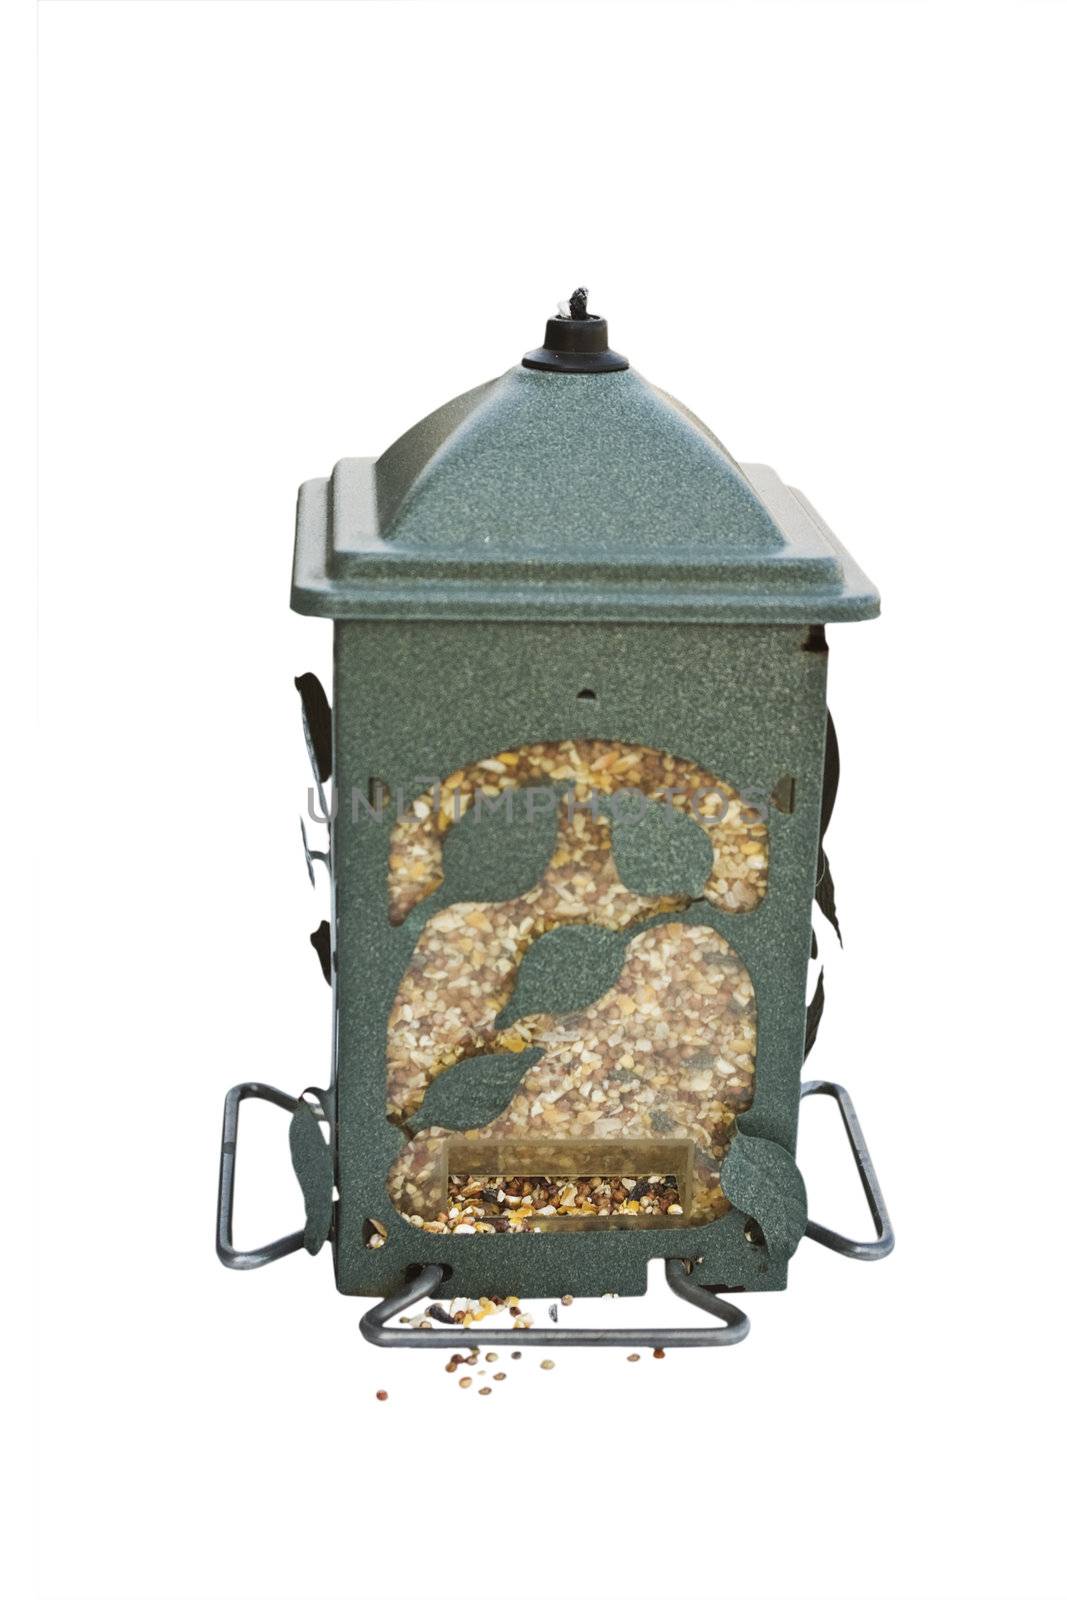 A garden bird feeder filled with seeds and isolated against a white background.
